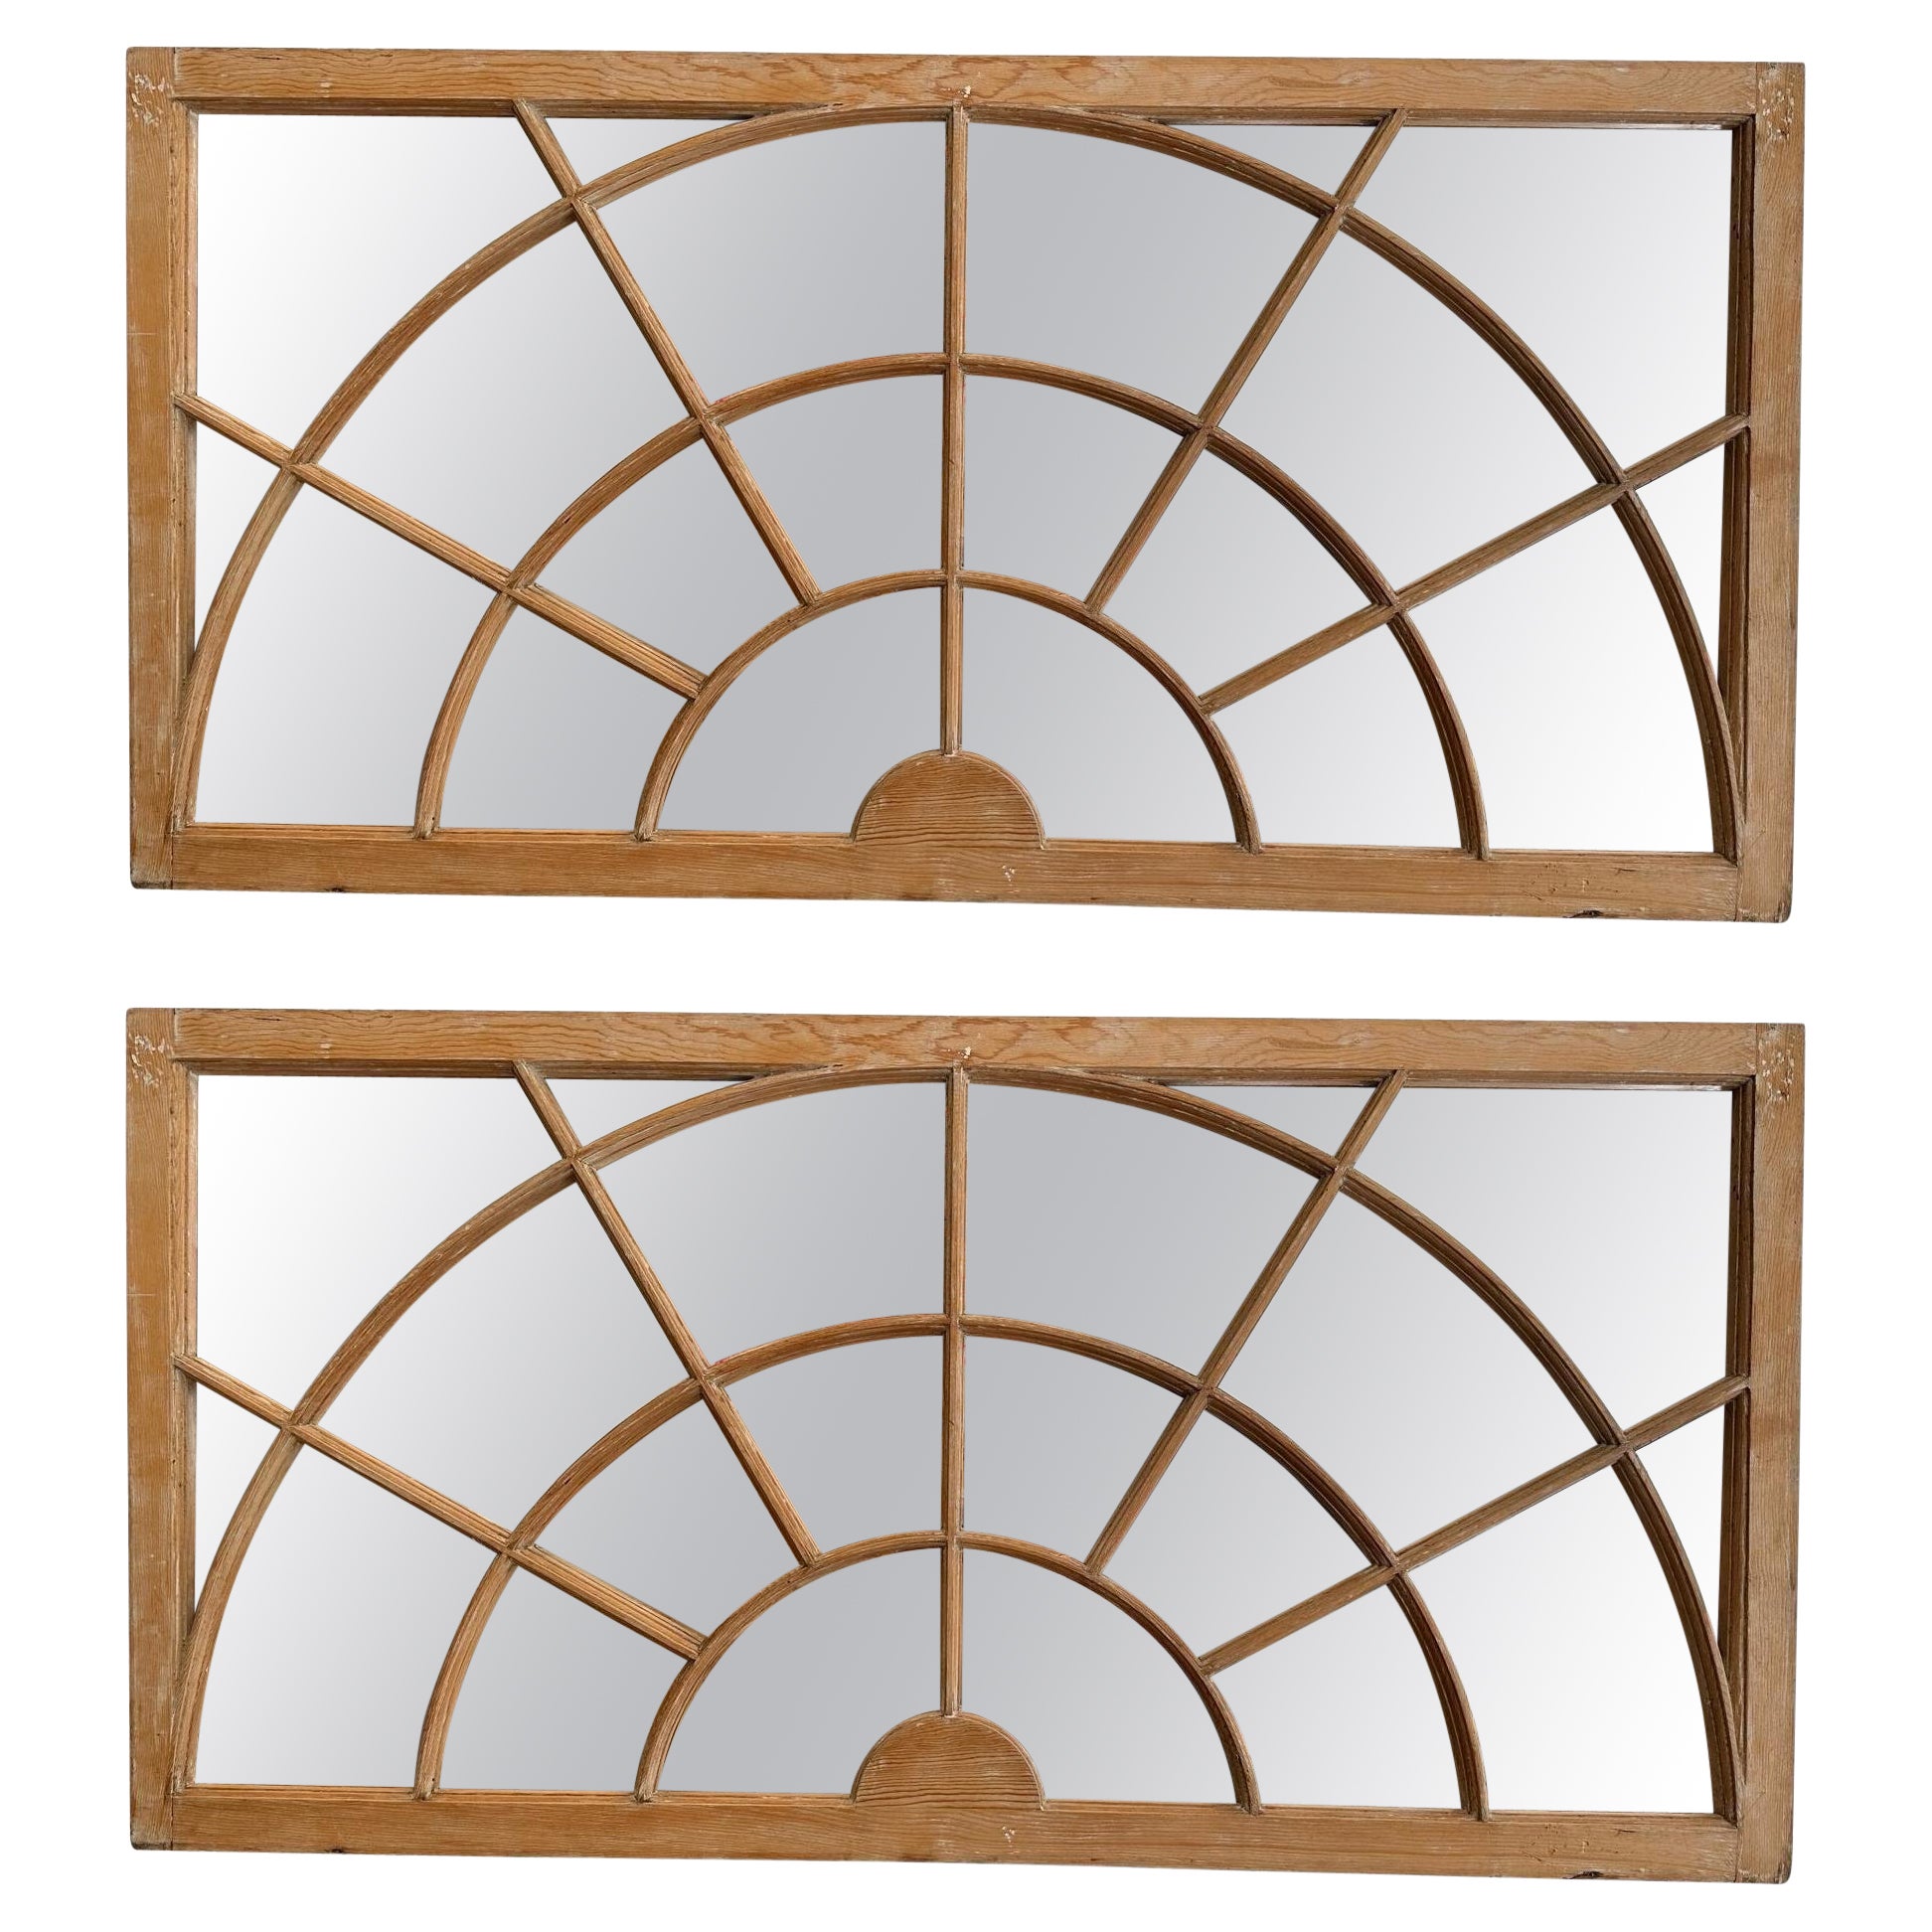 Unusual Pair of Georgian Styled Transom Windows Converted to Mirrors.